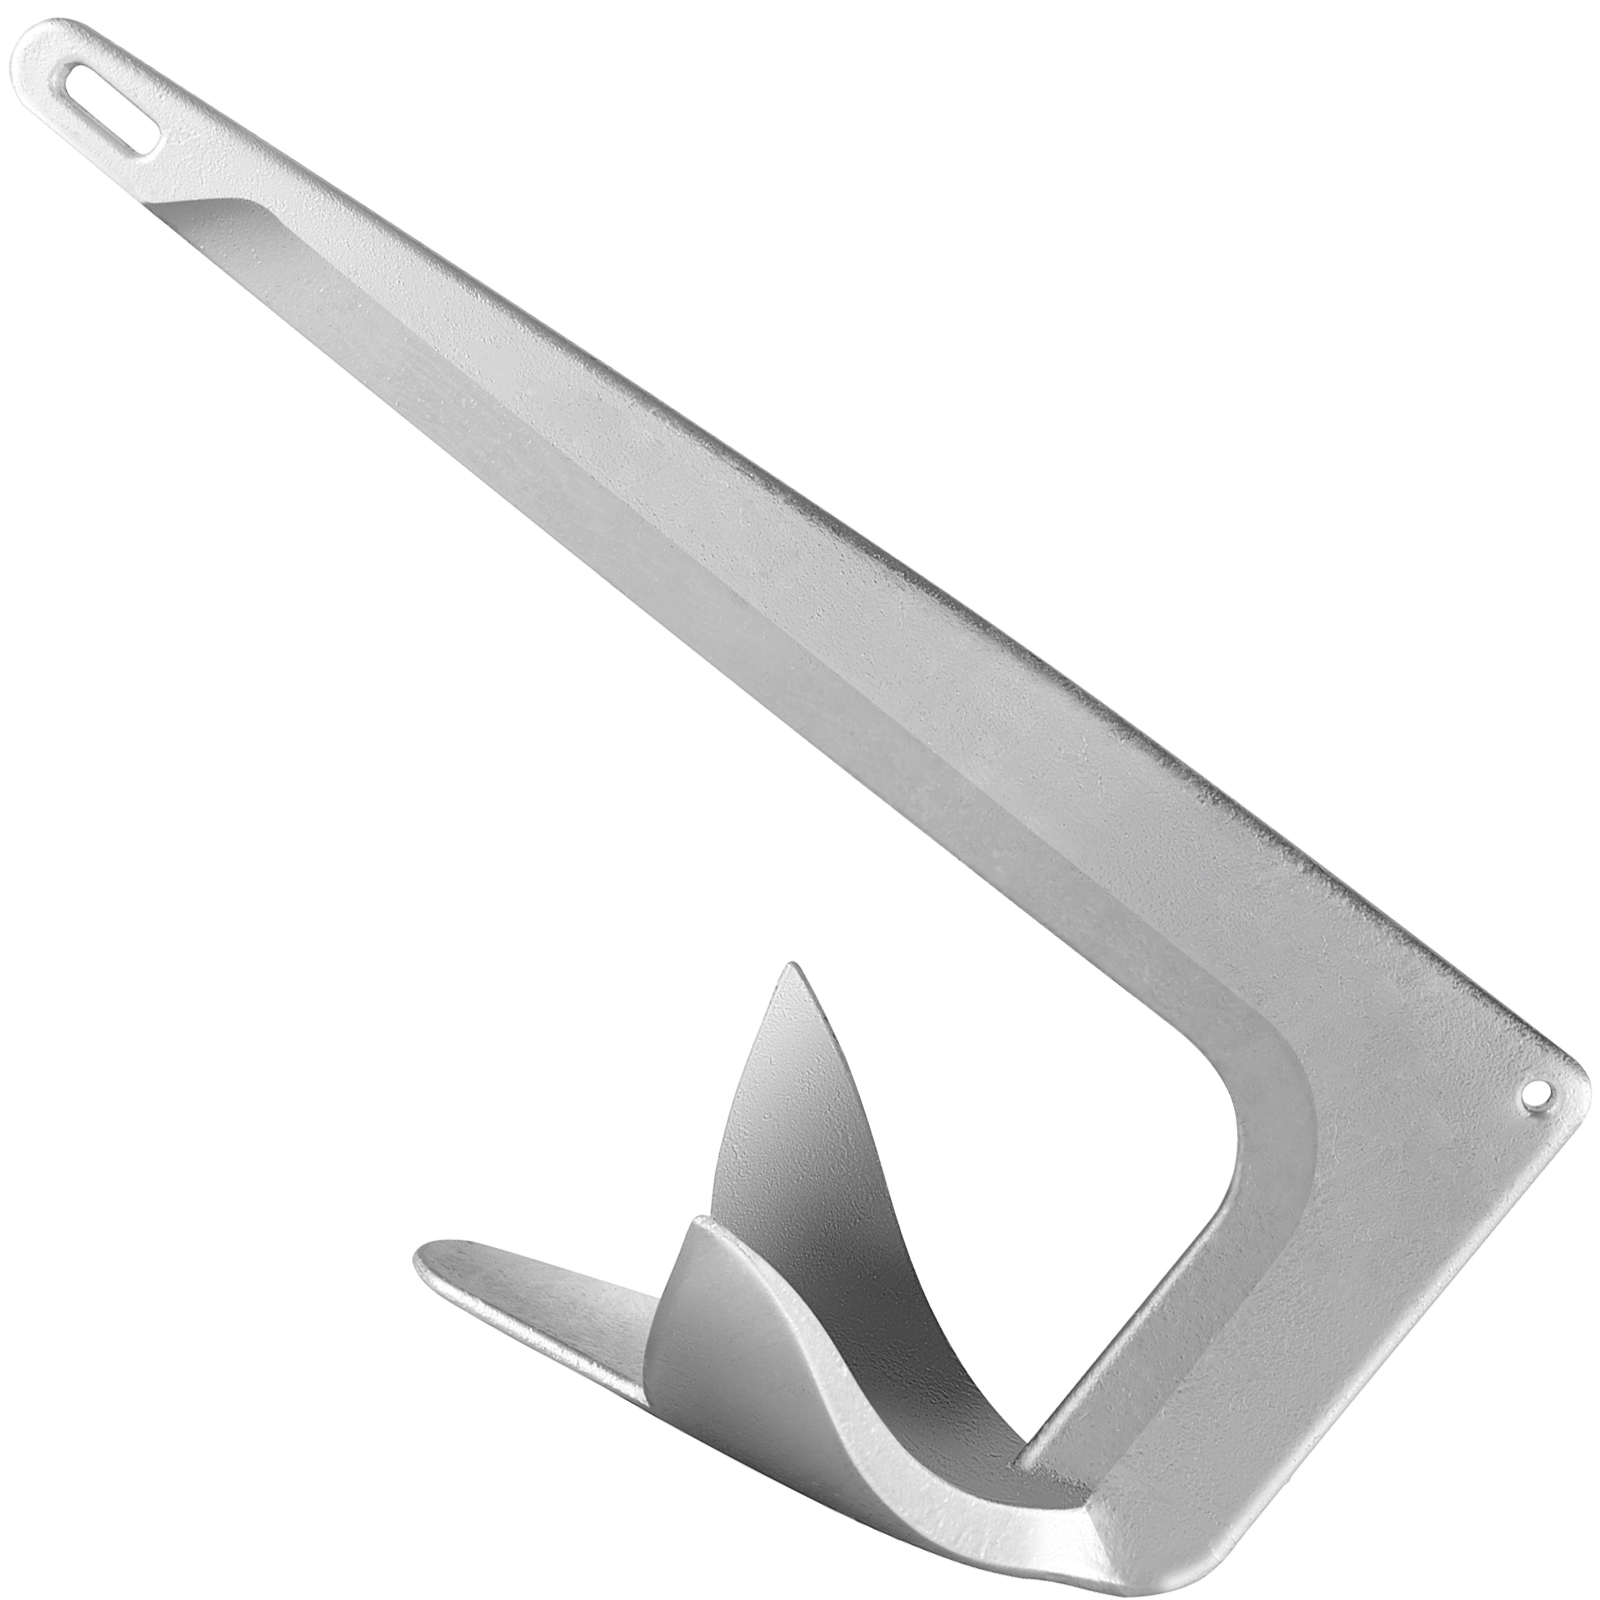 VEVOR Bruce Claw Anchor Boat Anchor 22 lb Galvanized Anchor for 26'-33' Boats от Vevor Many GEOs